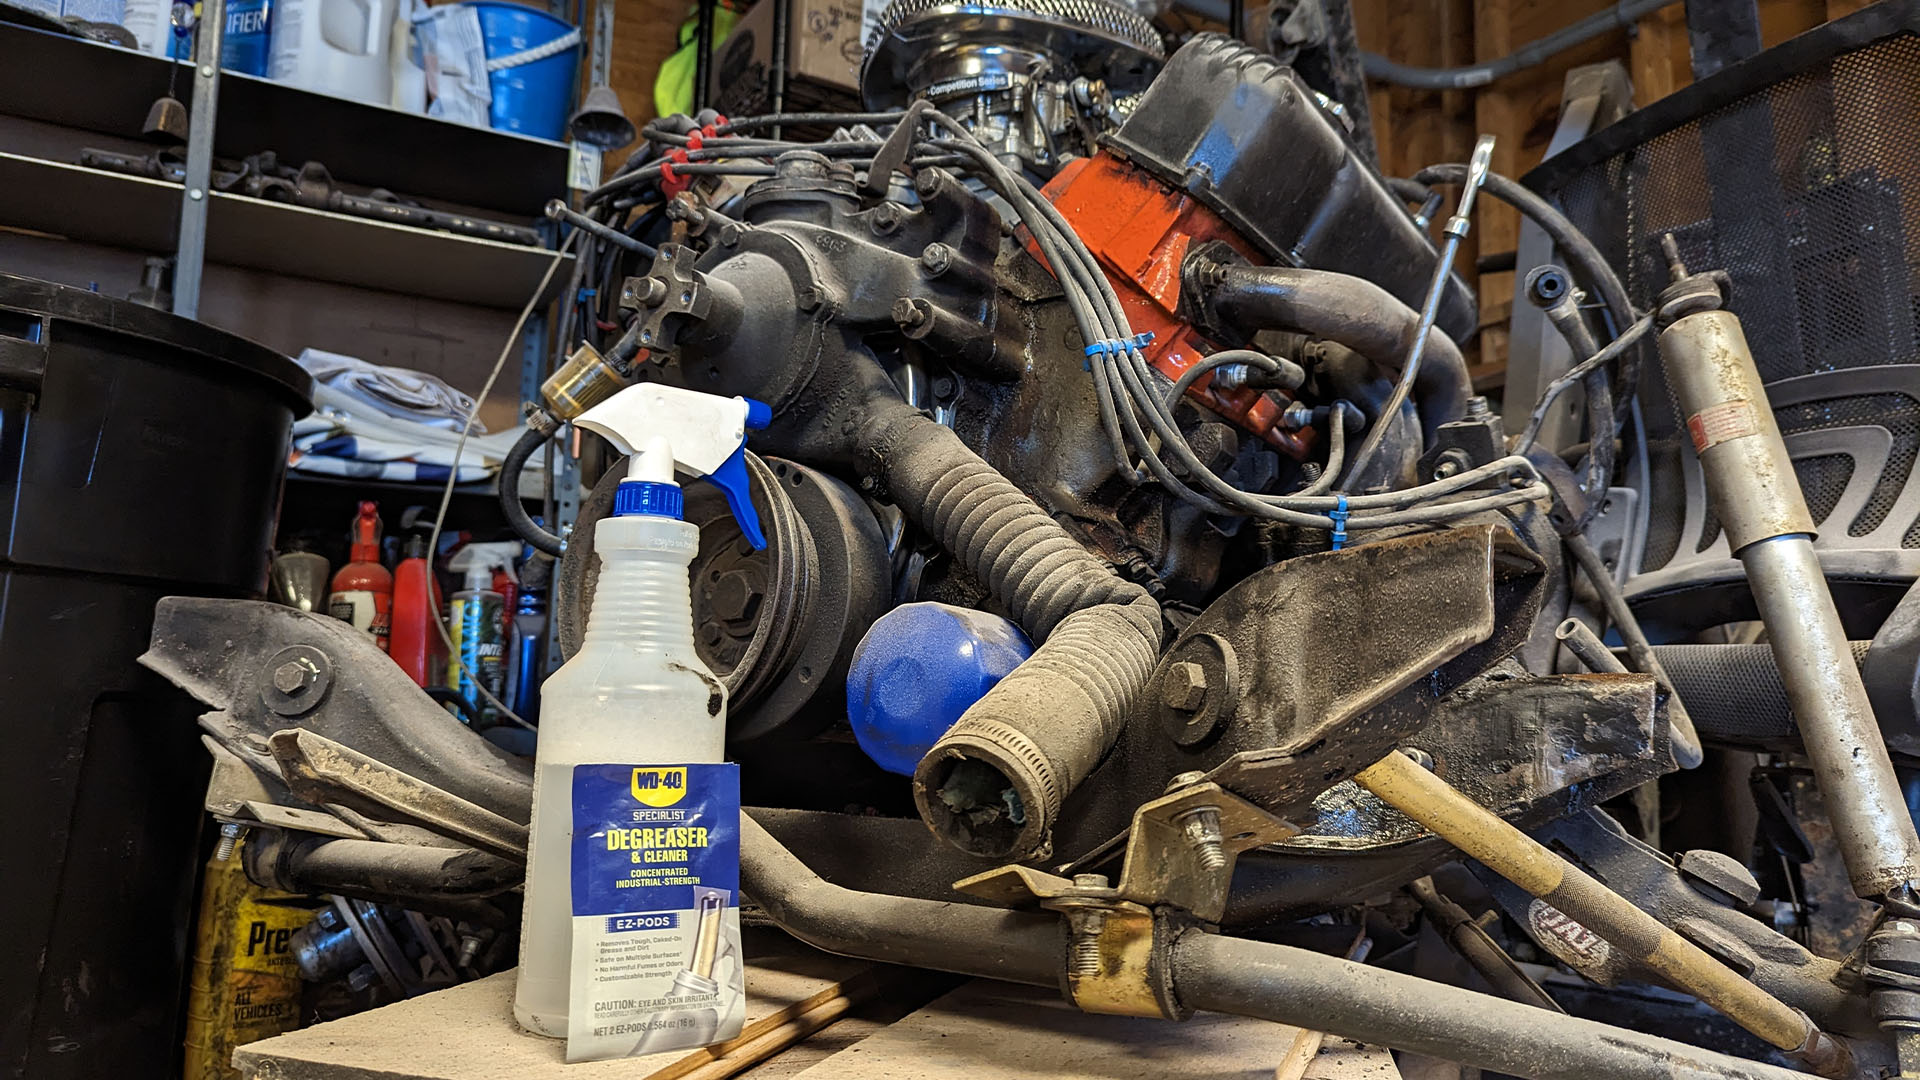 WD-40 Specialist Degreaser Pods